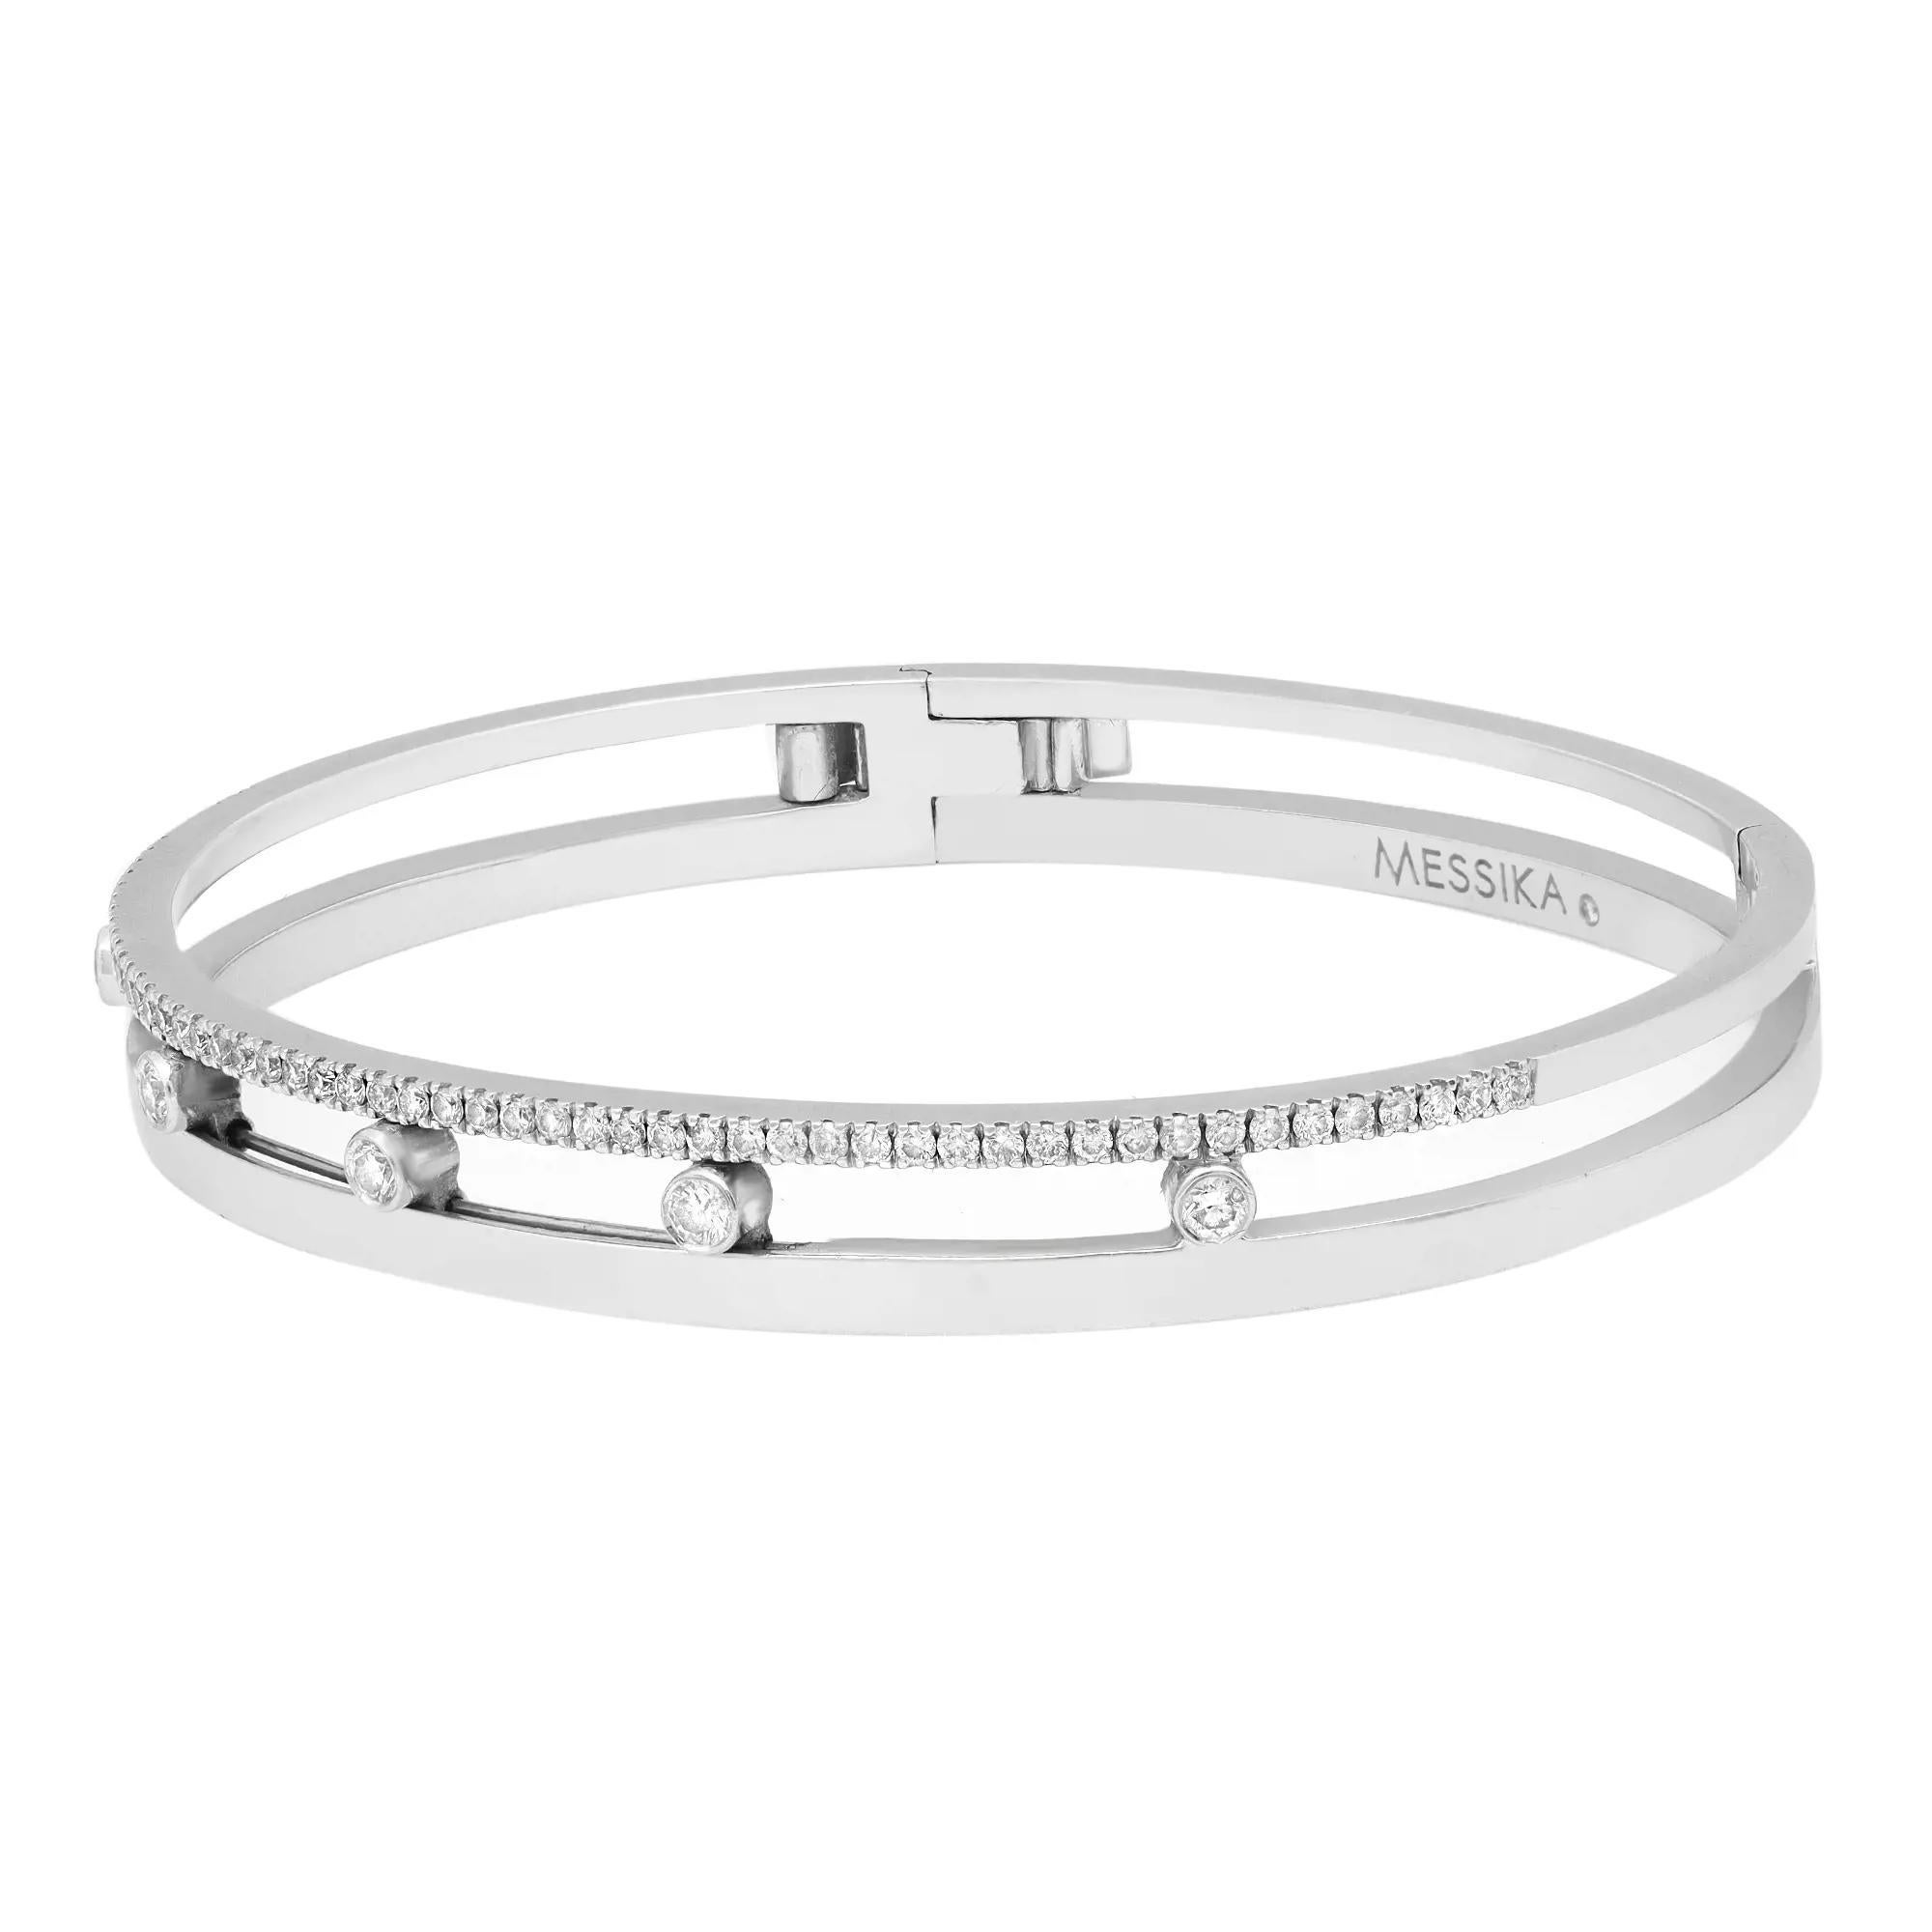 This Messika Move Romane luxury jewelry collection balances the shimmering of solid gold and the lightness of a diamond strand. Crafted in fine 18K white gold. An openwork bangle with modern asymmetry is balanced with five bezel set round brilliant